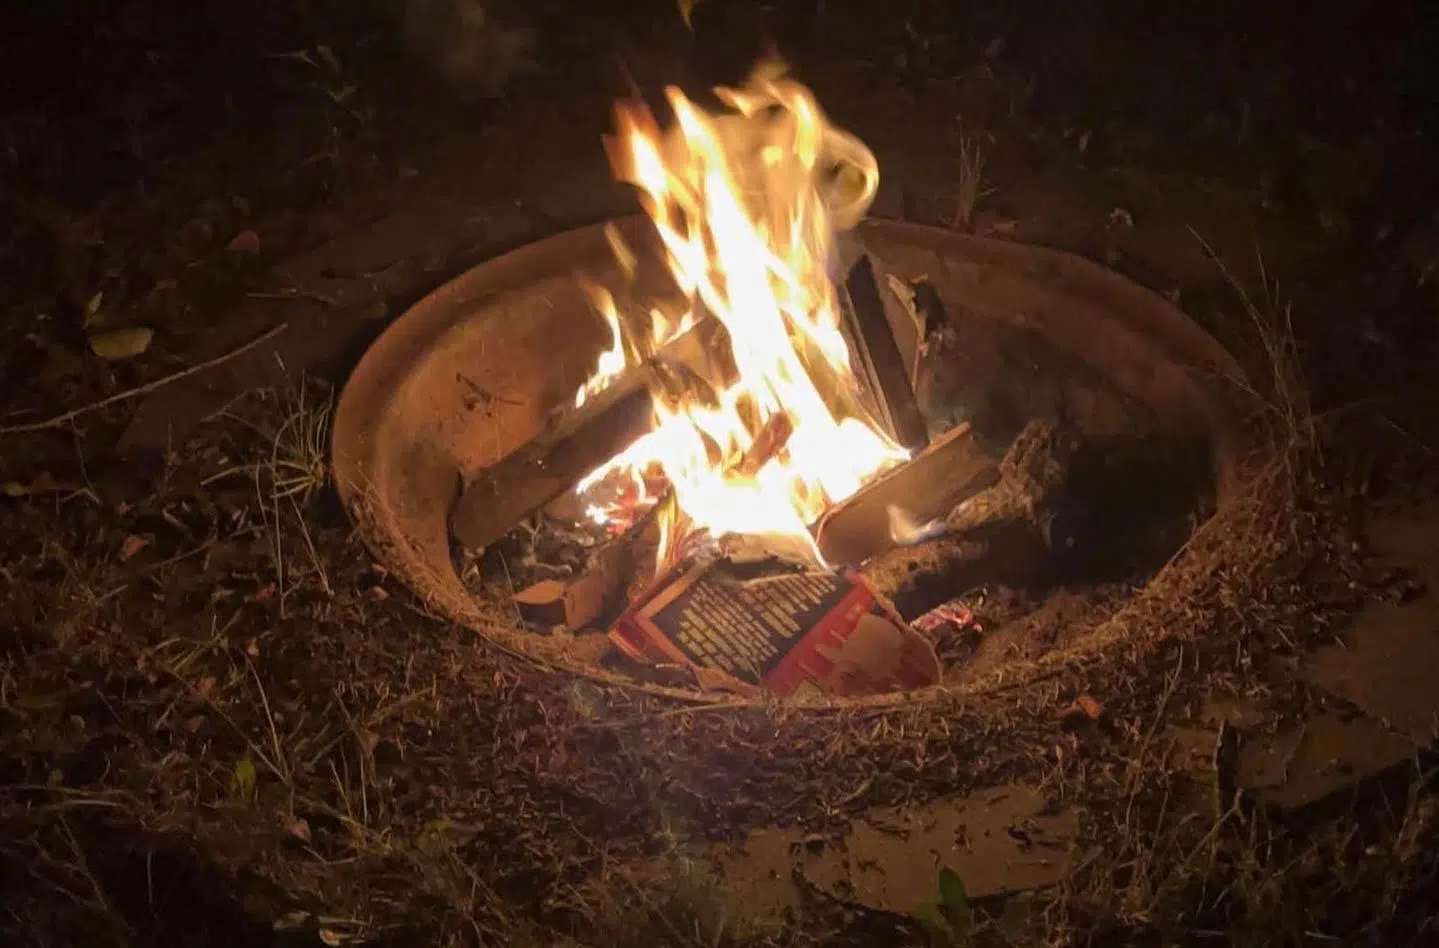 How to make the most of your camping trip amid campfire bans